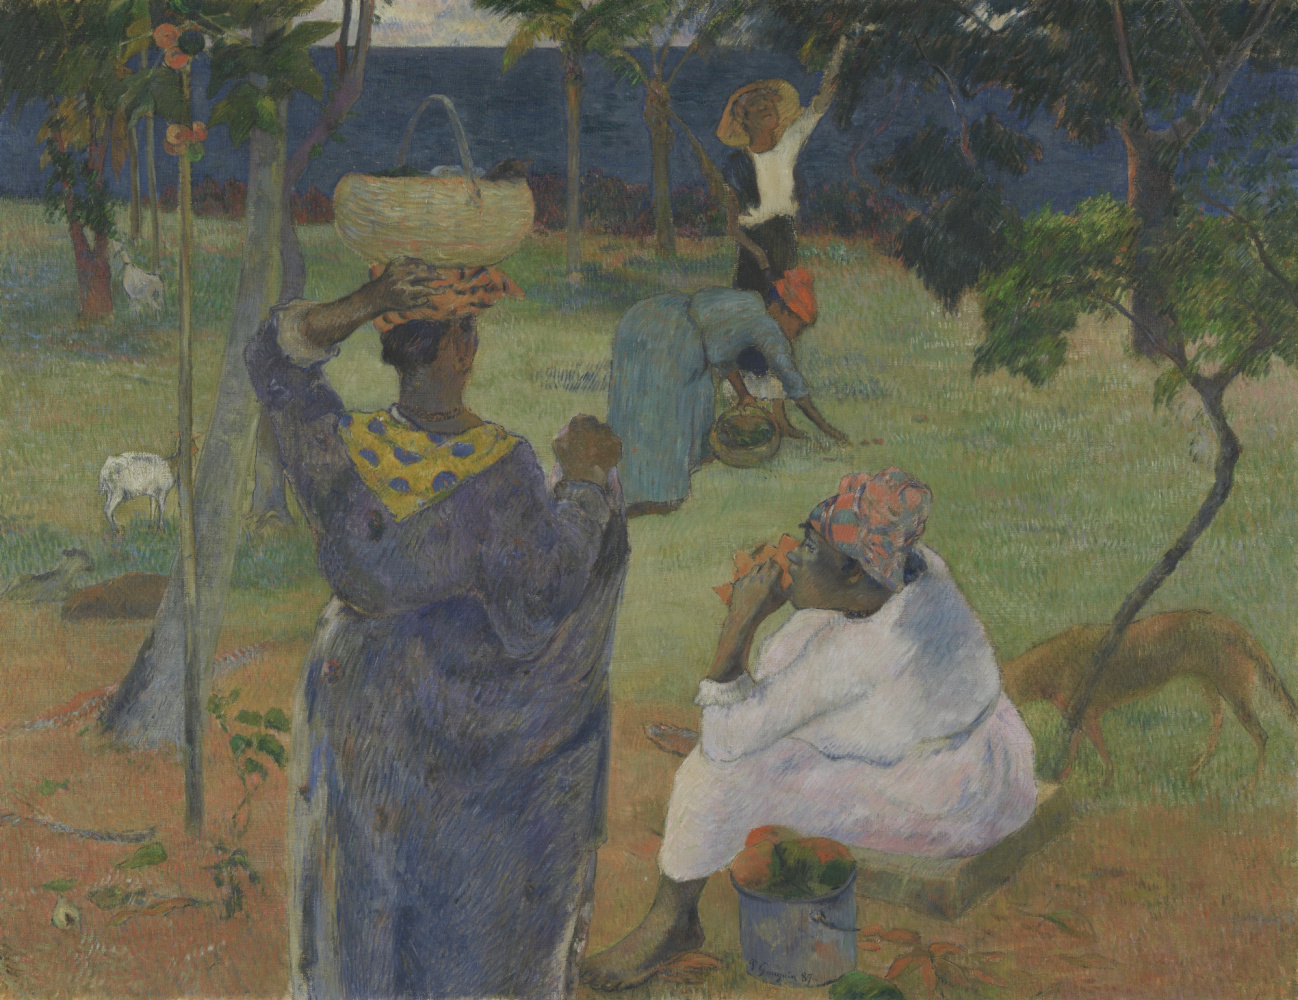 Martinique paintings by Gauguin and Laval in Van Gogh Museum